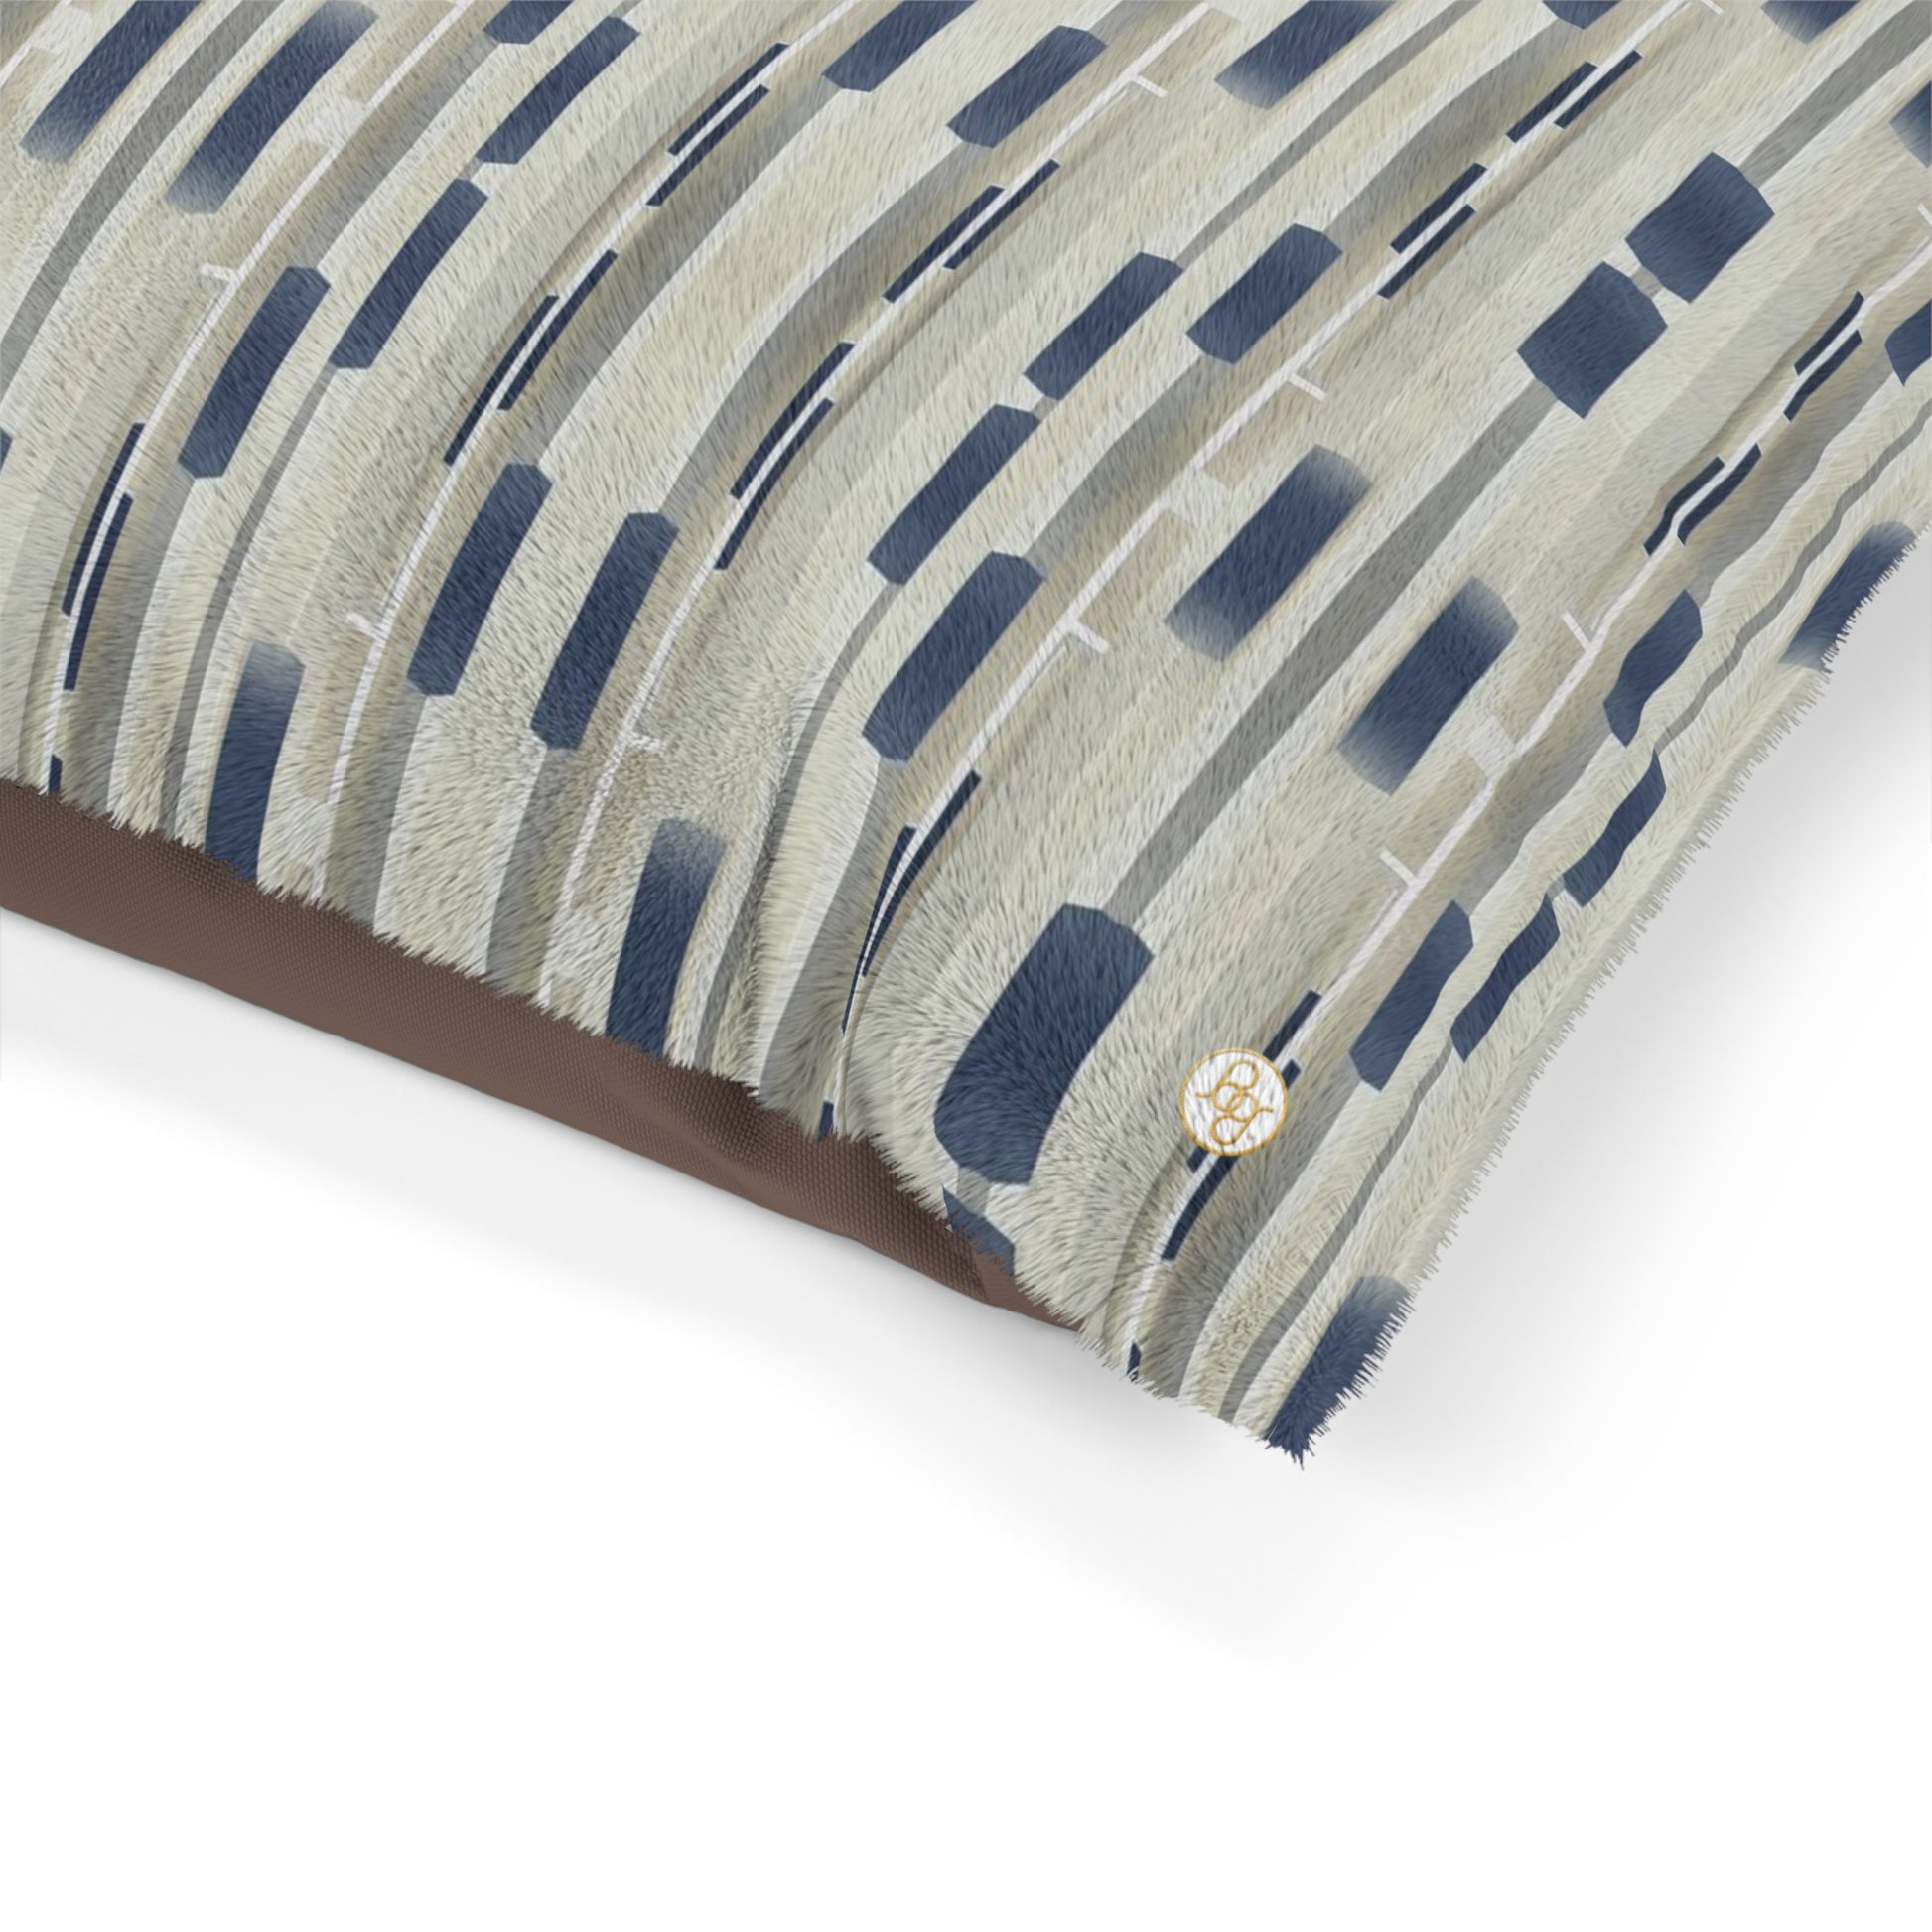 Fleece dog bed featuring a collaged stripe pattern in khaki and navy blue